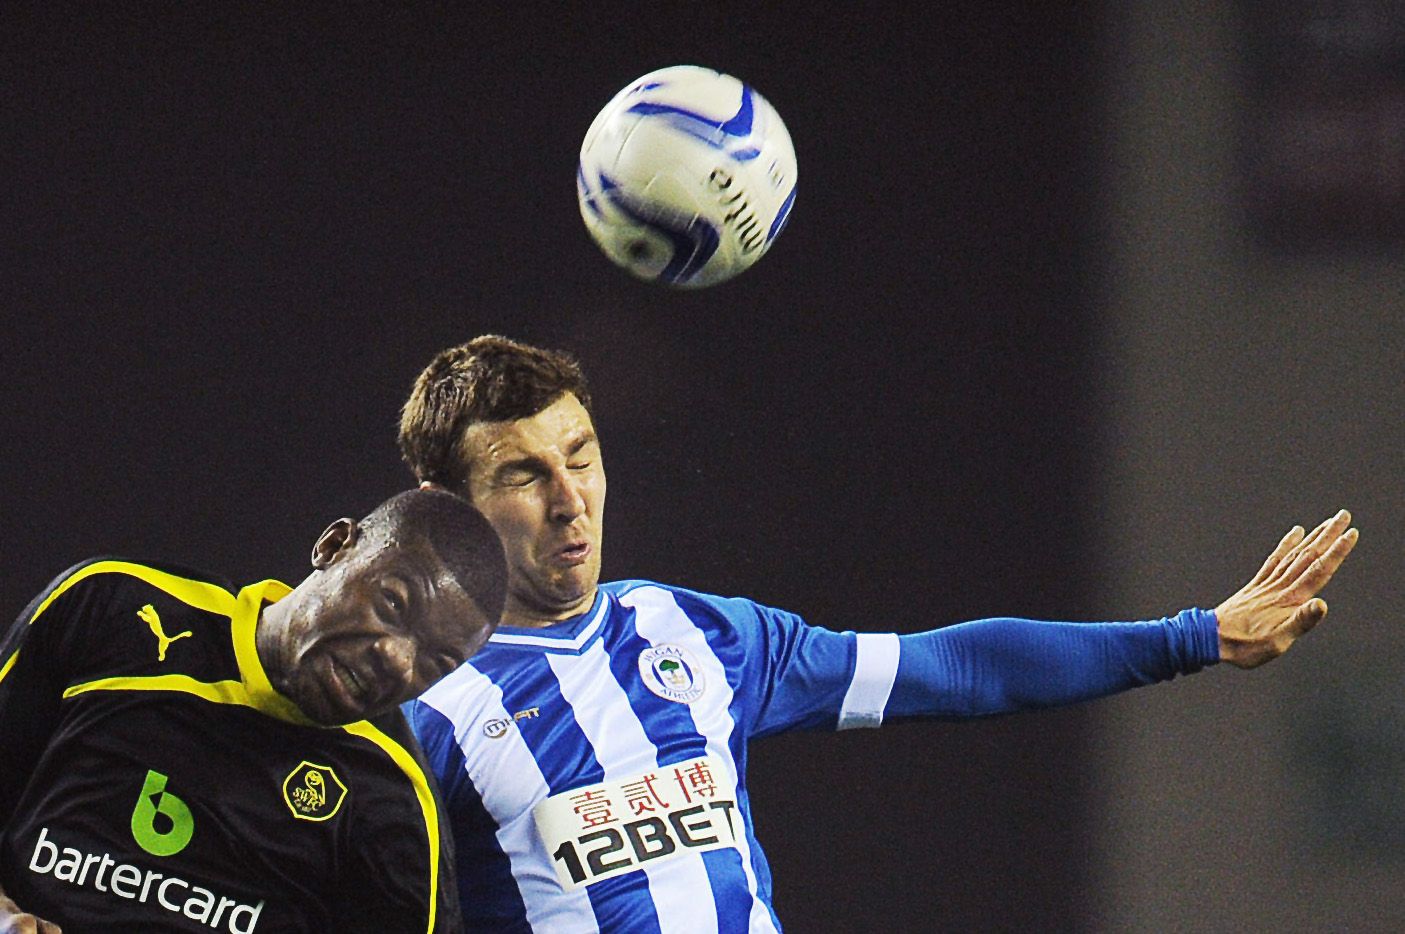 Football - Wigan Athletic v Sheffield Wednesday - Sky Bet Football League Championship - DW Stadium - 12/3/14 
Wigan Athletic's James McArthur (R) and Sheffield Wednesday's Adedeji Oshilaja in action 
Mandatory Credit: Action Images / Paul Burrows 
Livepic 
EDITORIAL USE ONLY. No use with unauthorized audio, video, data, fixture lists, club/league logos or 